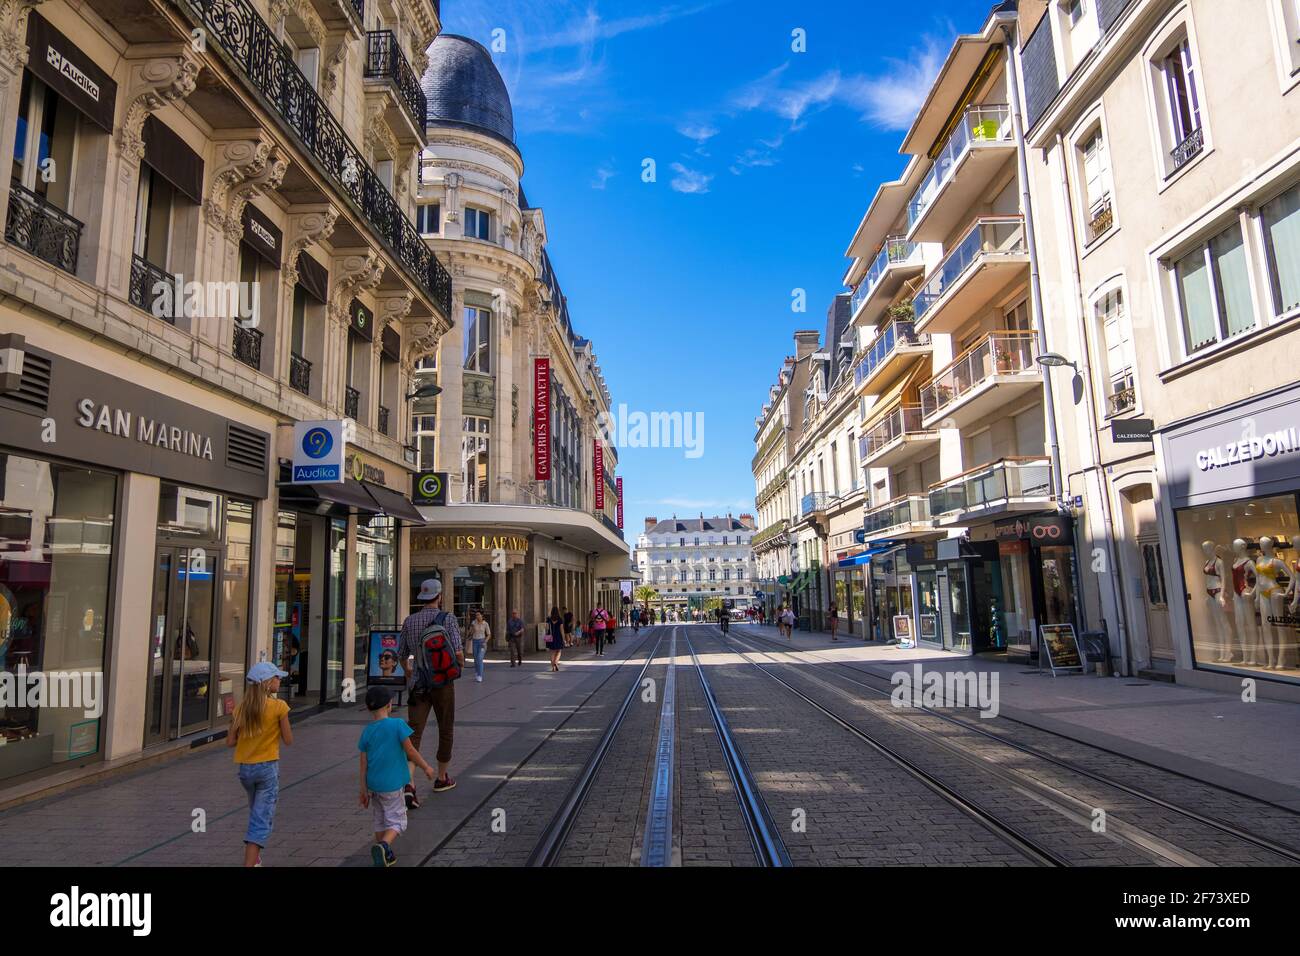 Angers, France - August 23, 2019: A Rue ...